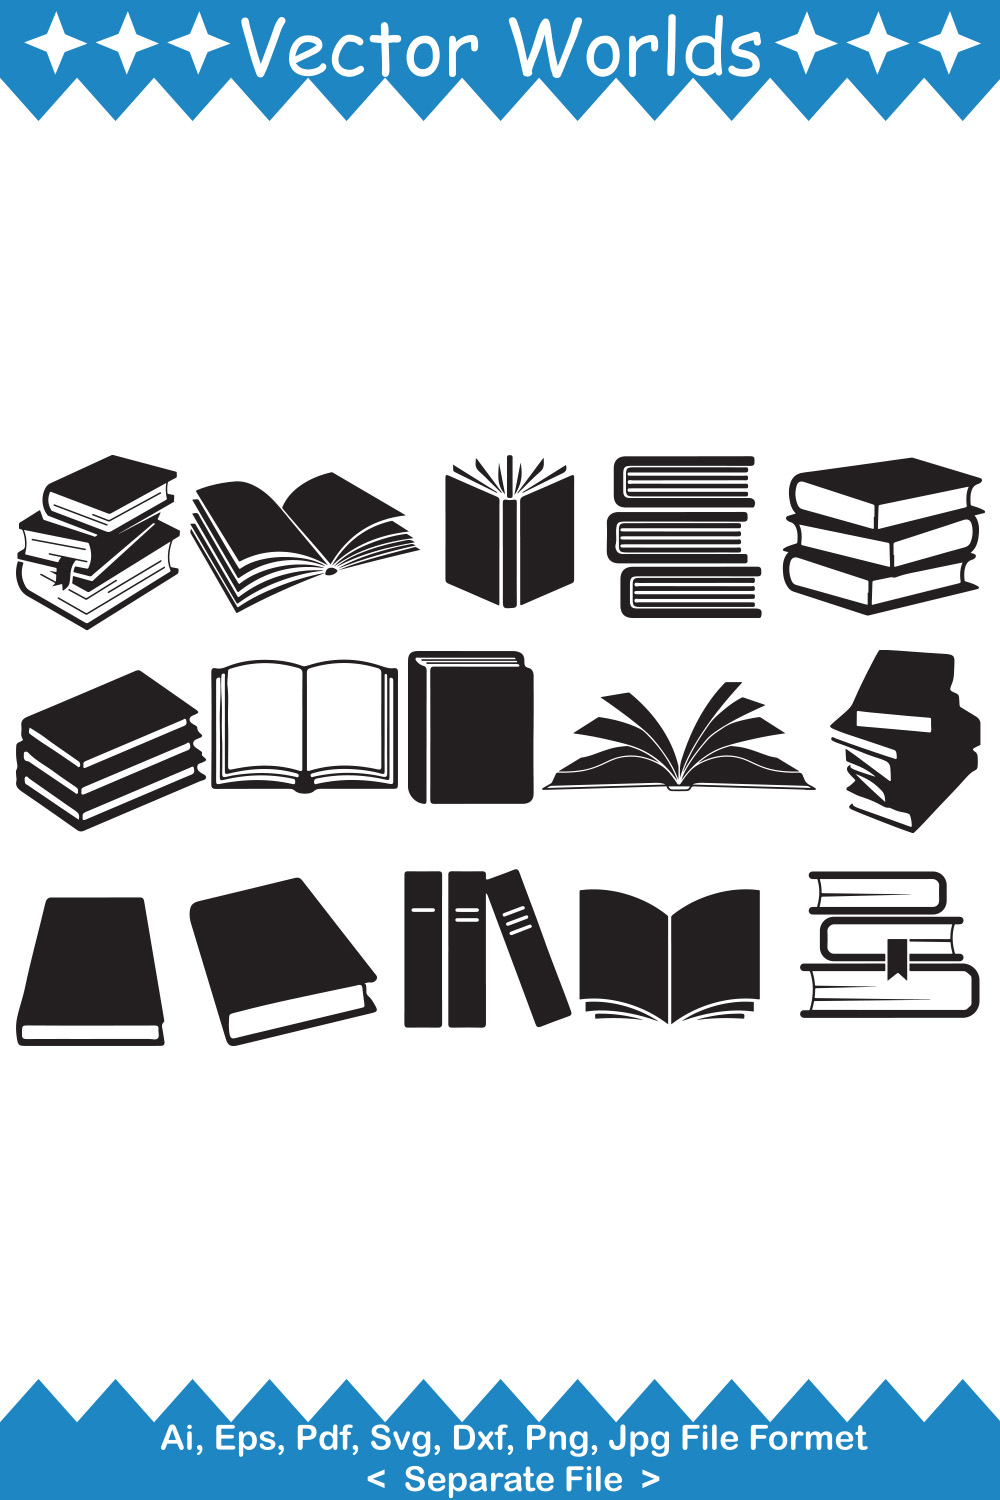 A selection of vector irresistible images of books in black.